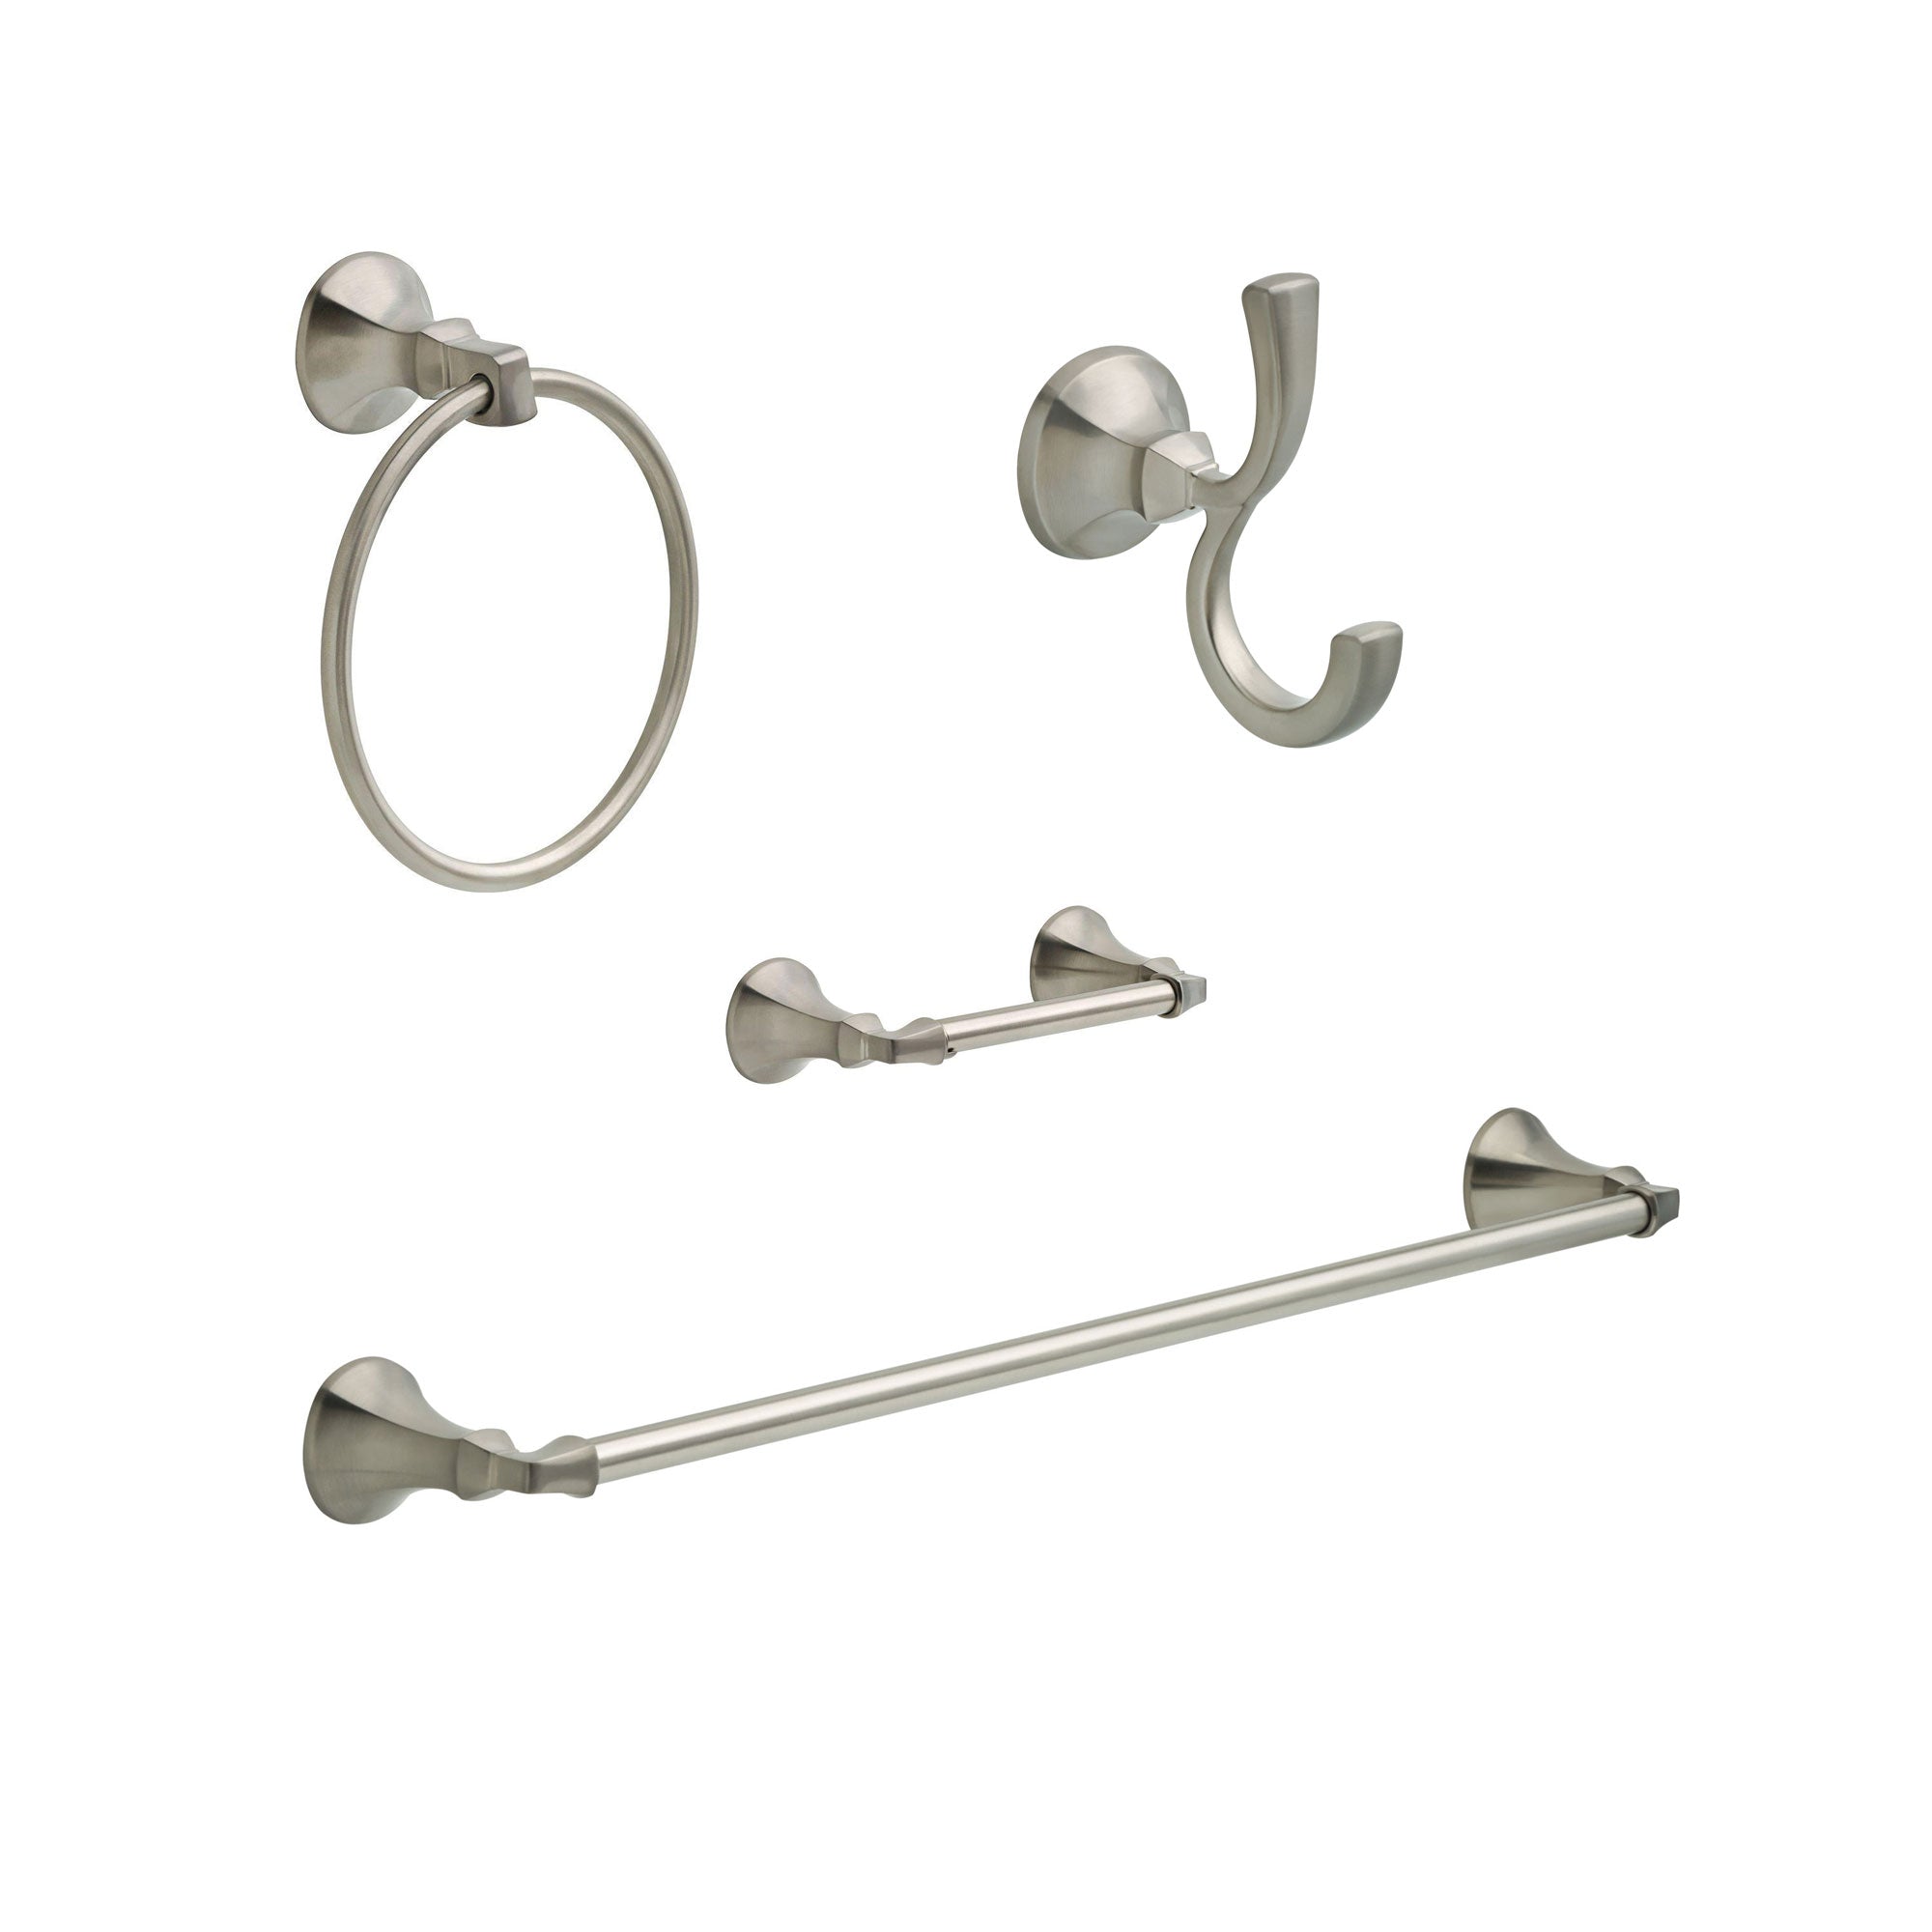 Delta Ashlyn Stainless Steel Finish STANDARD Bathroom Accessory Set Includes: 24" Towel Bar, Toilet Paper Holder, Robe Hook, and Towel Ring D10085AP